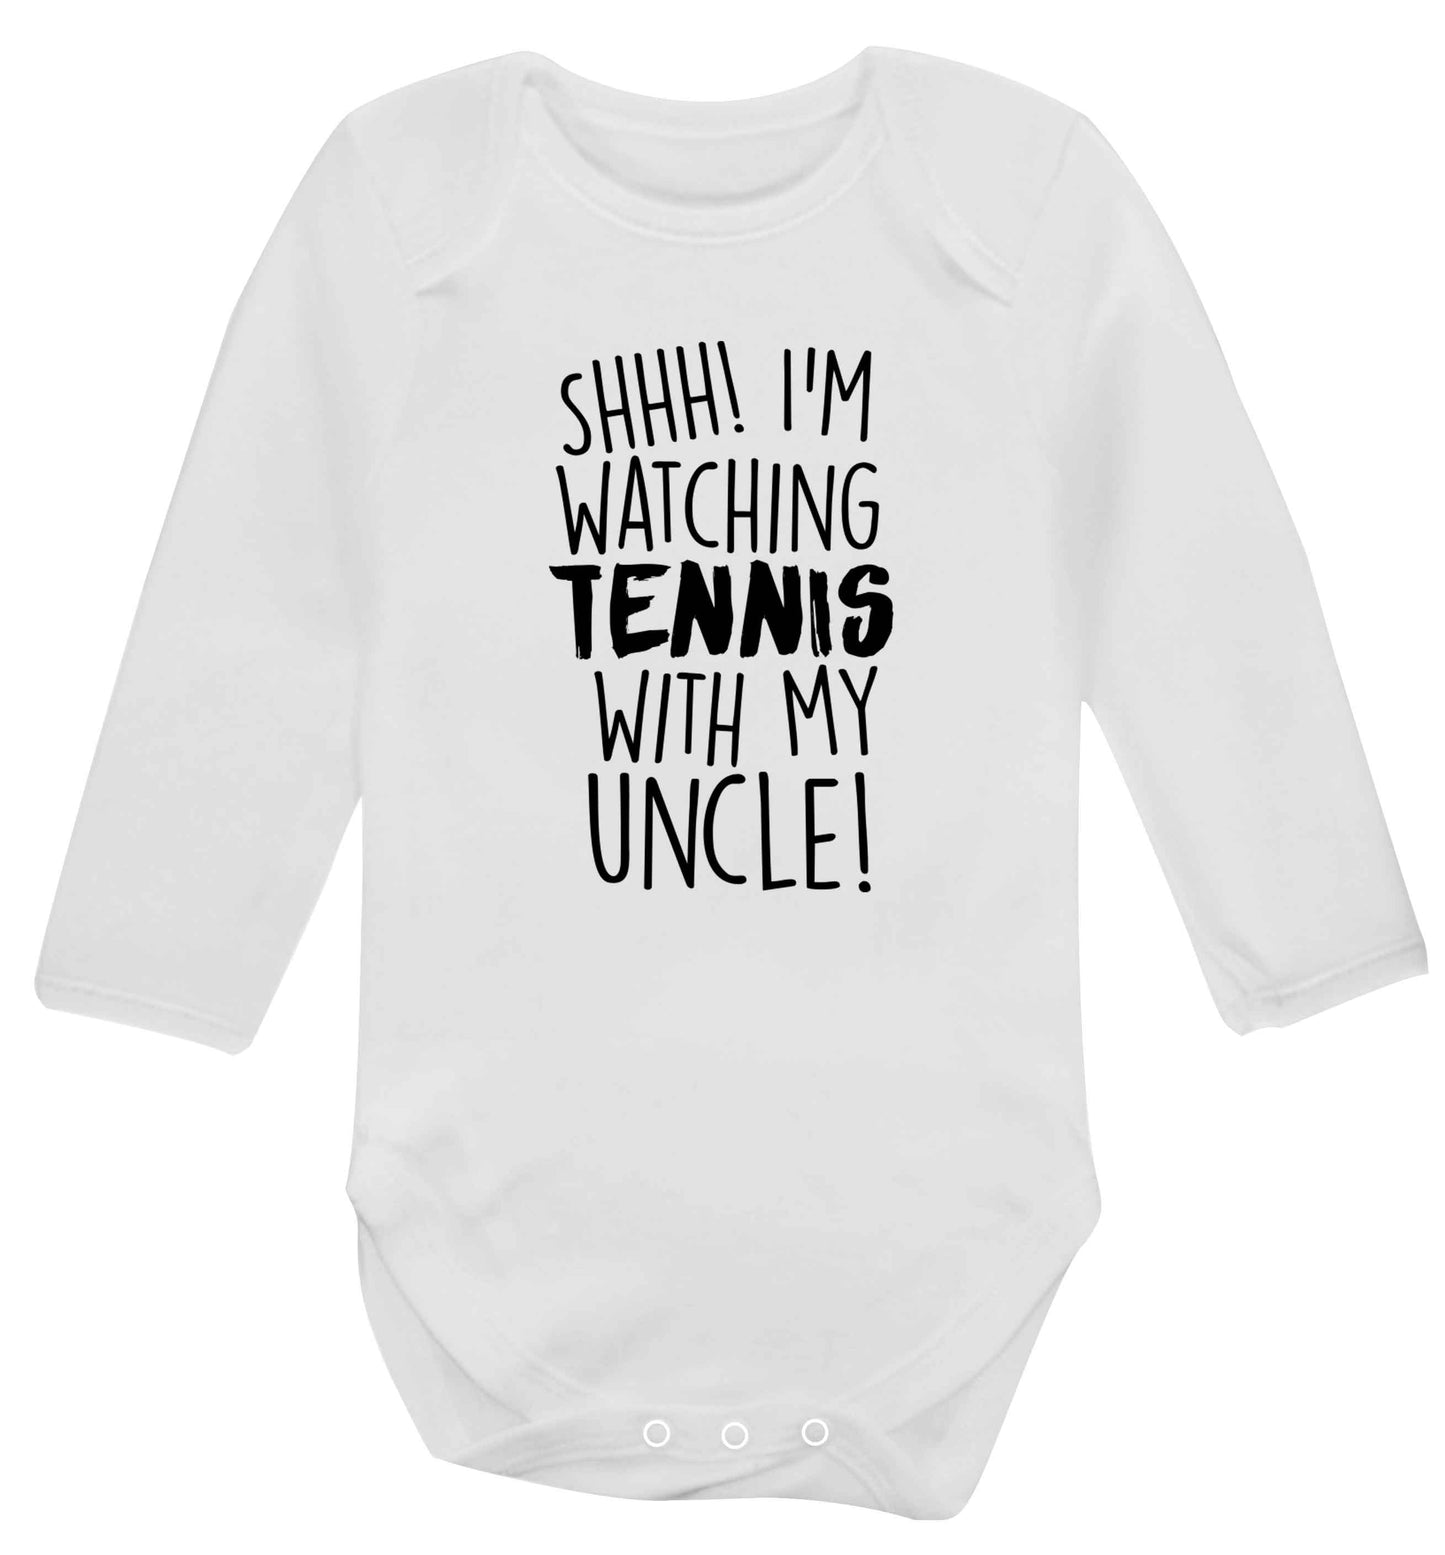 Shh! I'm watching tennis with my uncle! Baby Vest long sleeved white 6-12 months